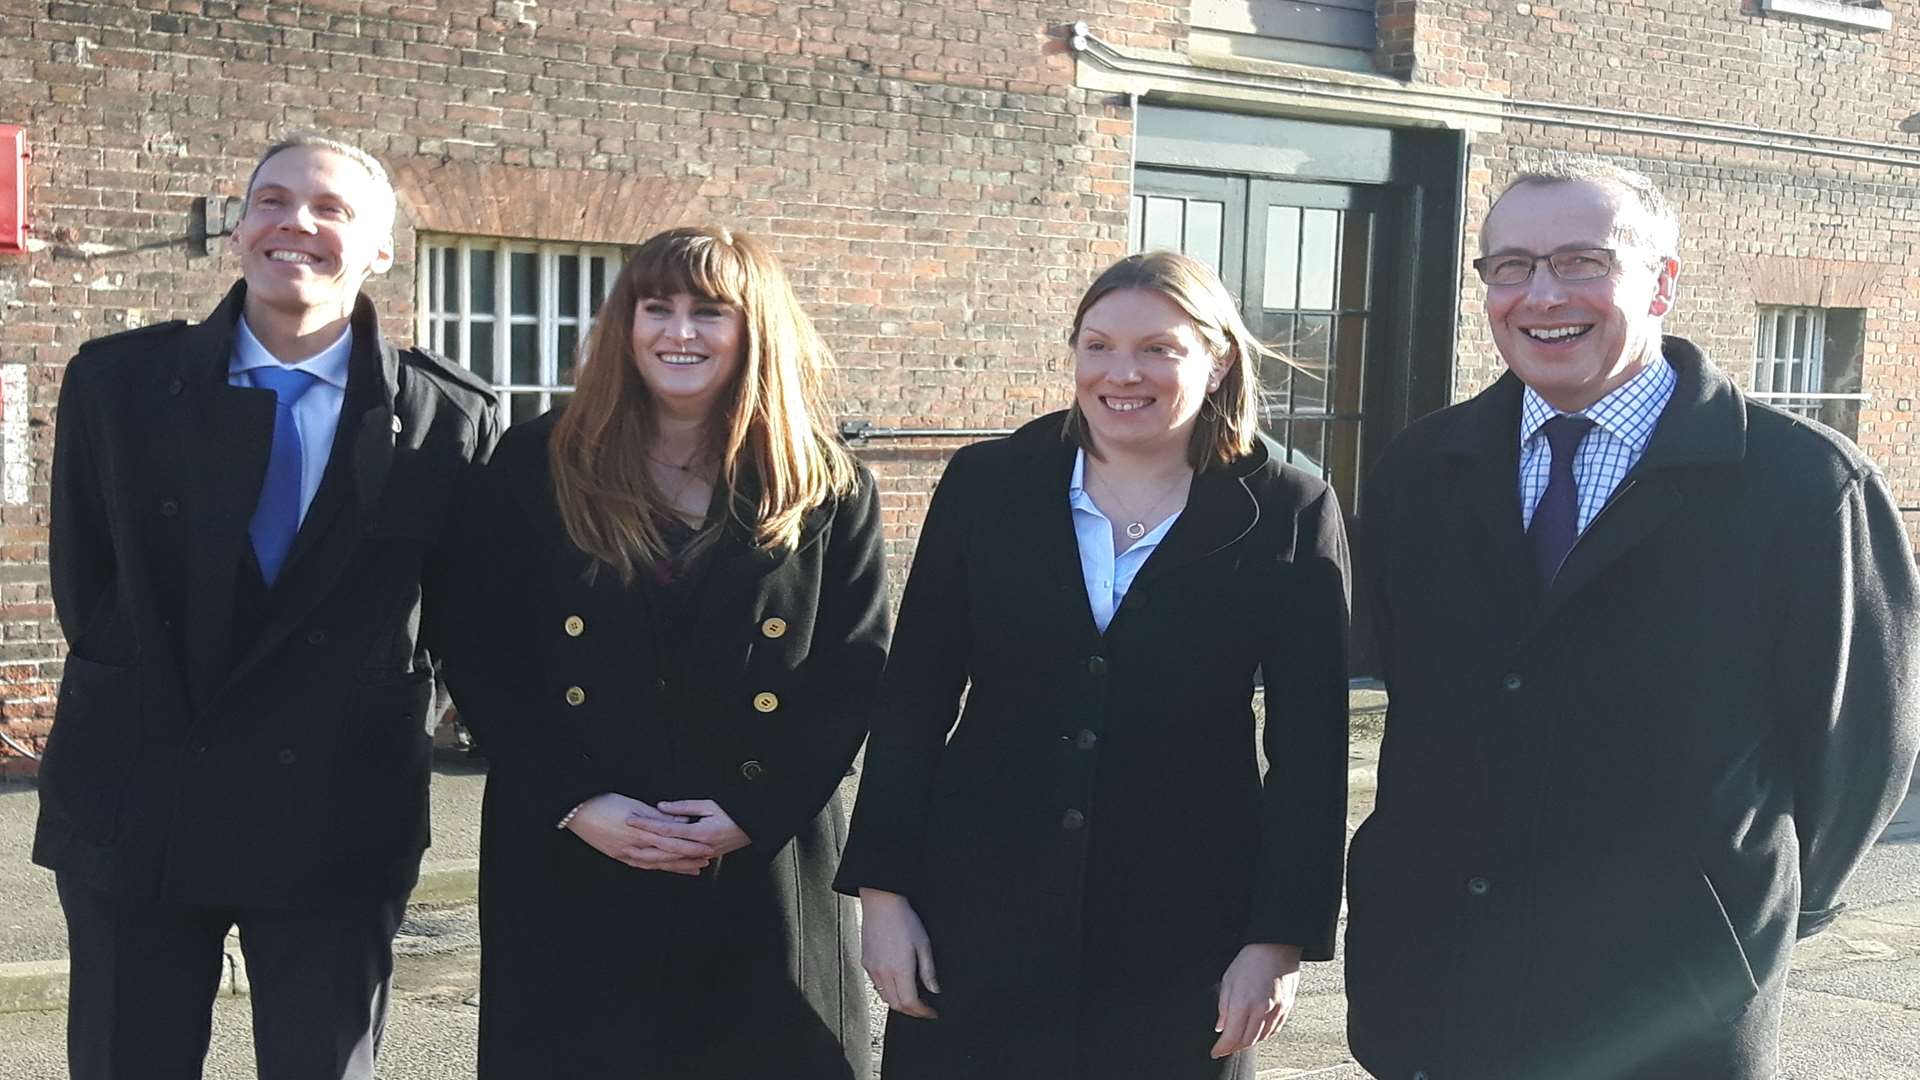 Stuart McLeod, head of the Heritage Lottery Fund, for south east England, Rochester and Strood MP Kelly Tolhurst, heritage minister and Chatham MP Tracey Crouch and Bill Ferris chief executive of the Chatham Historic Dockyard Trust